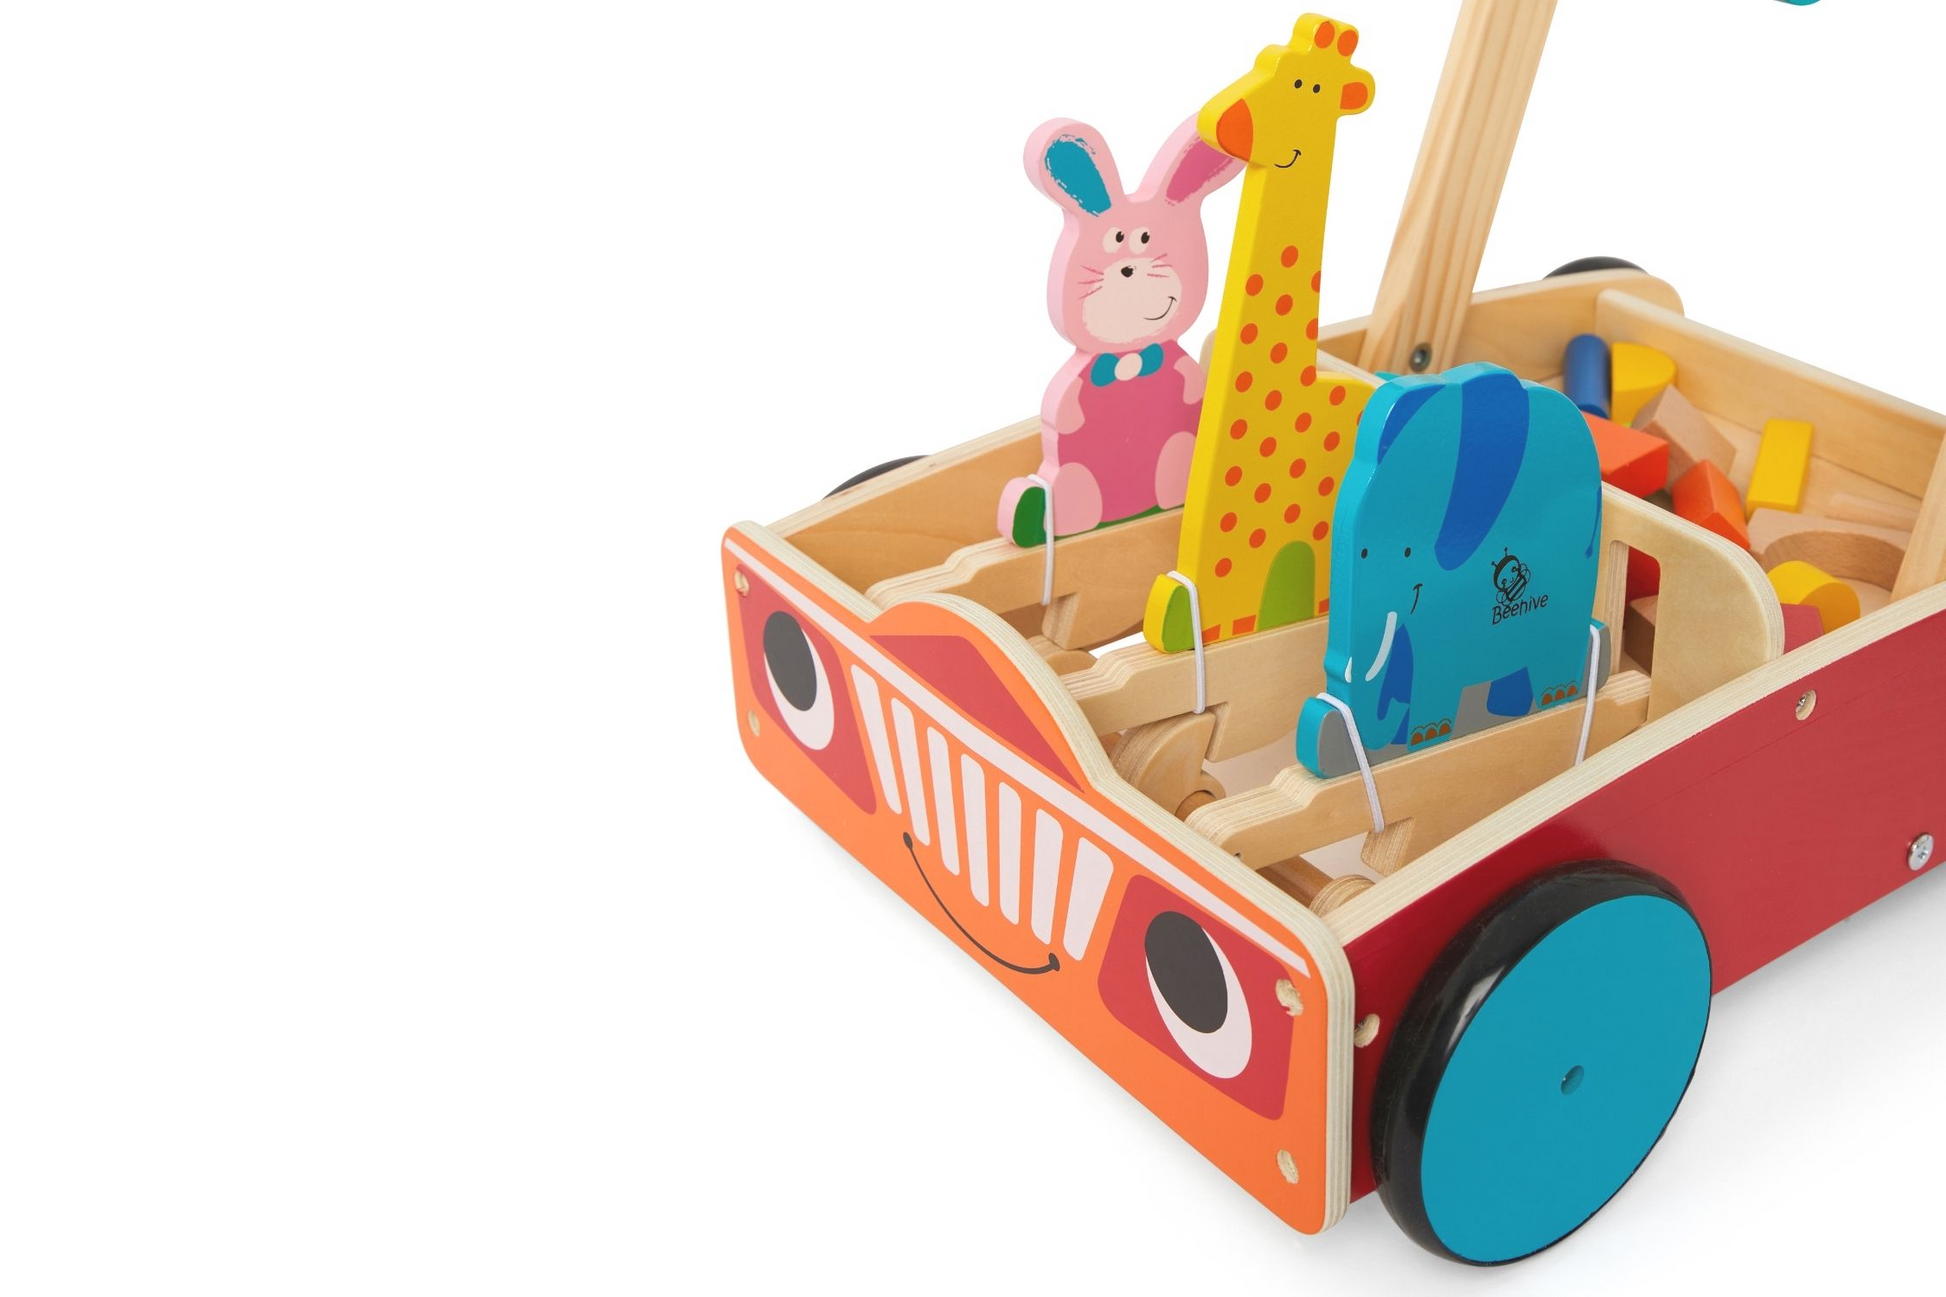 Wooden push along walker with animals which bob up and down as the walker goes along.